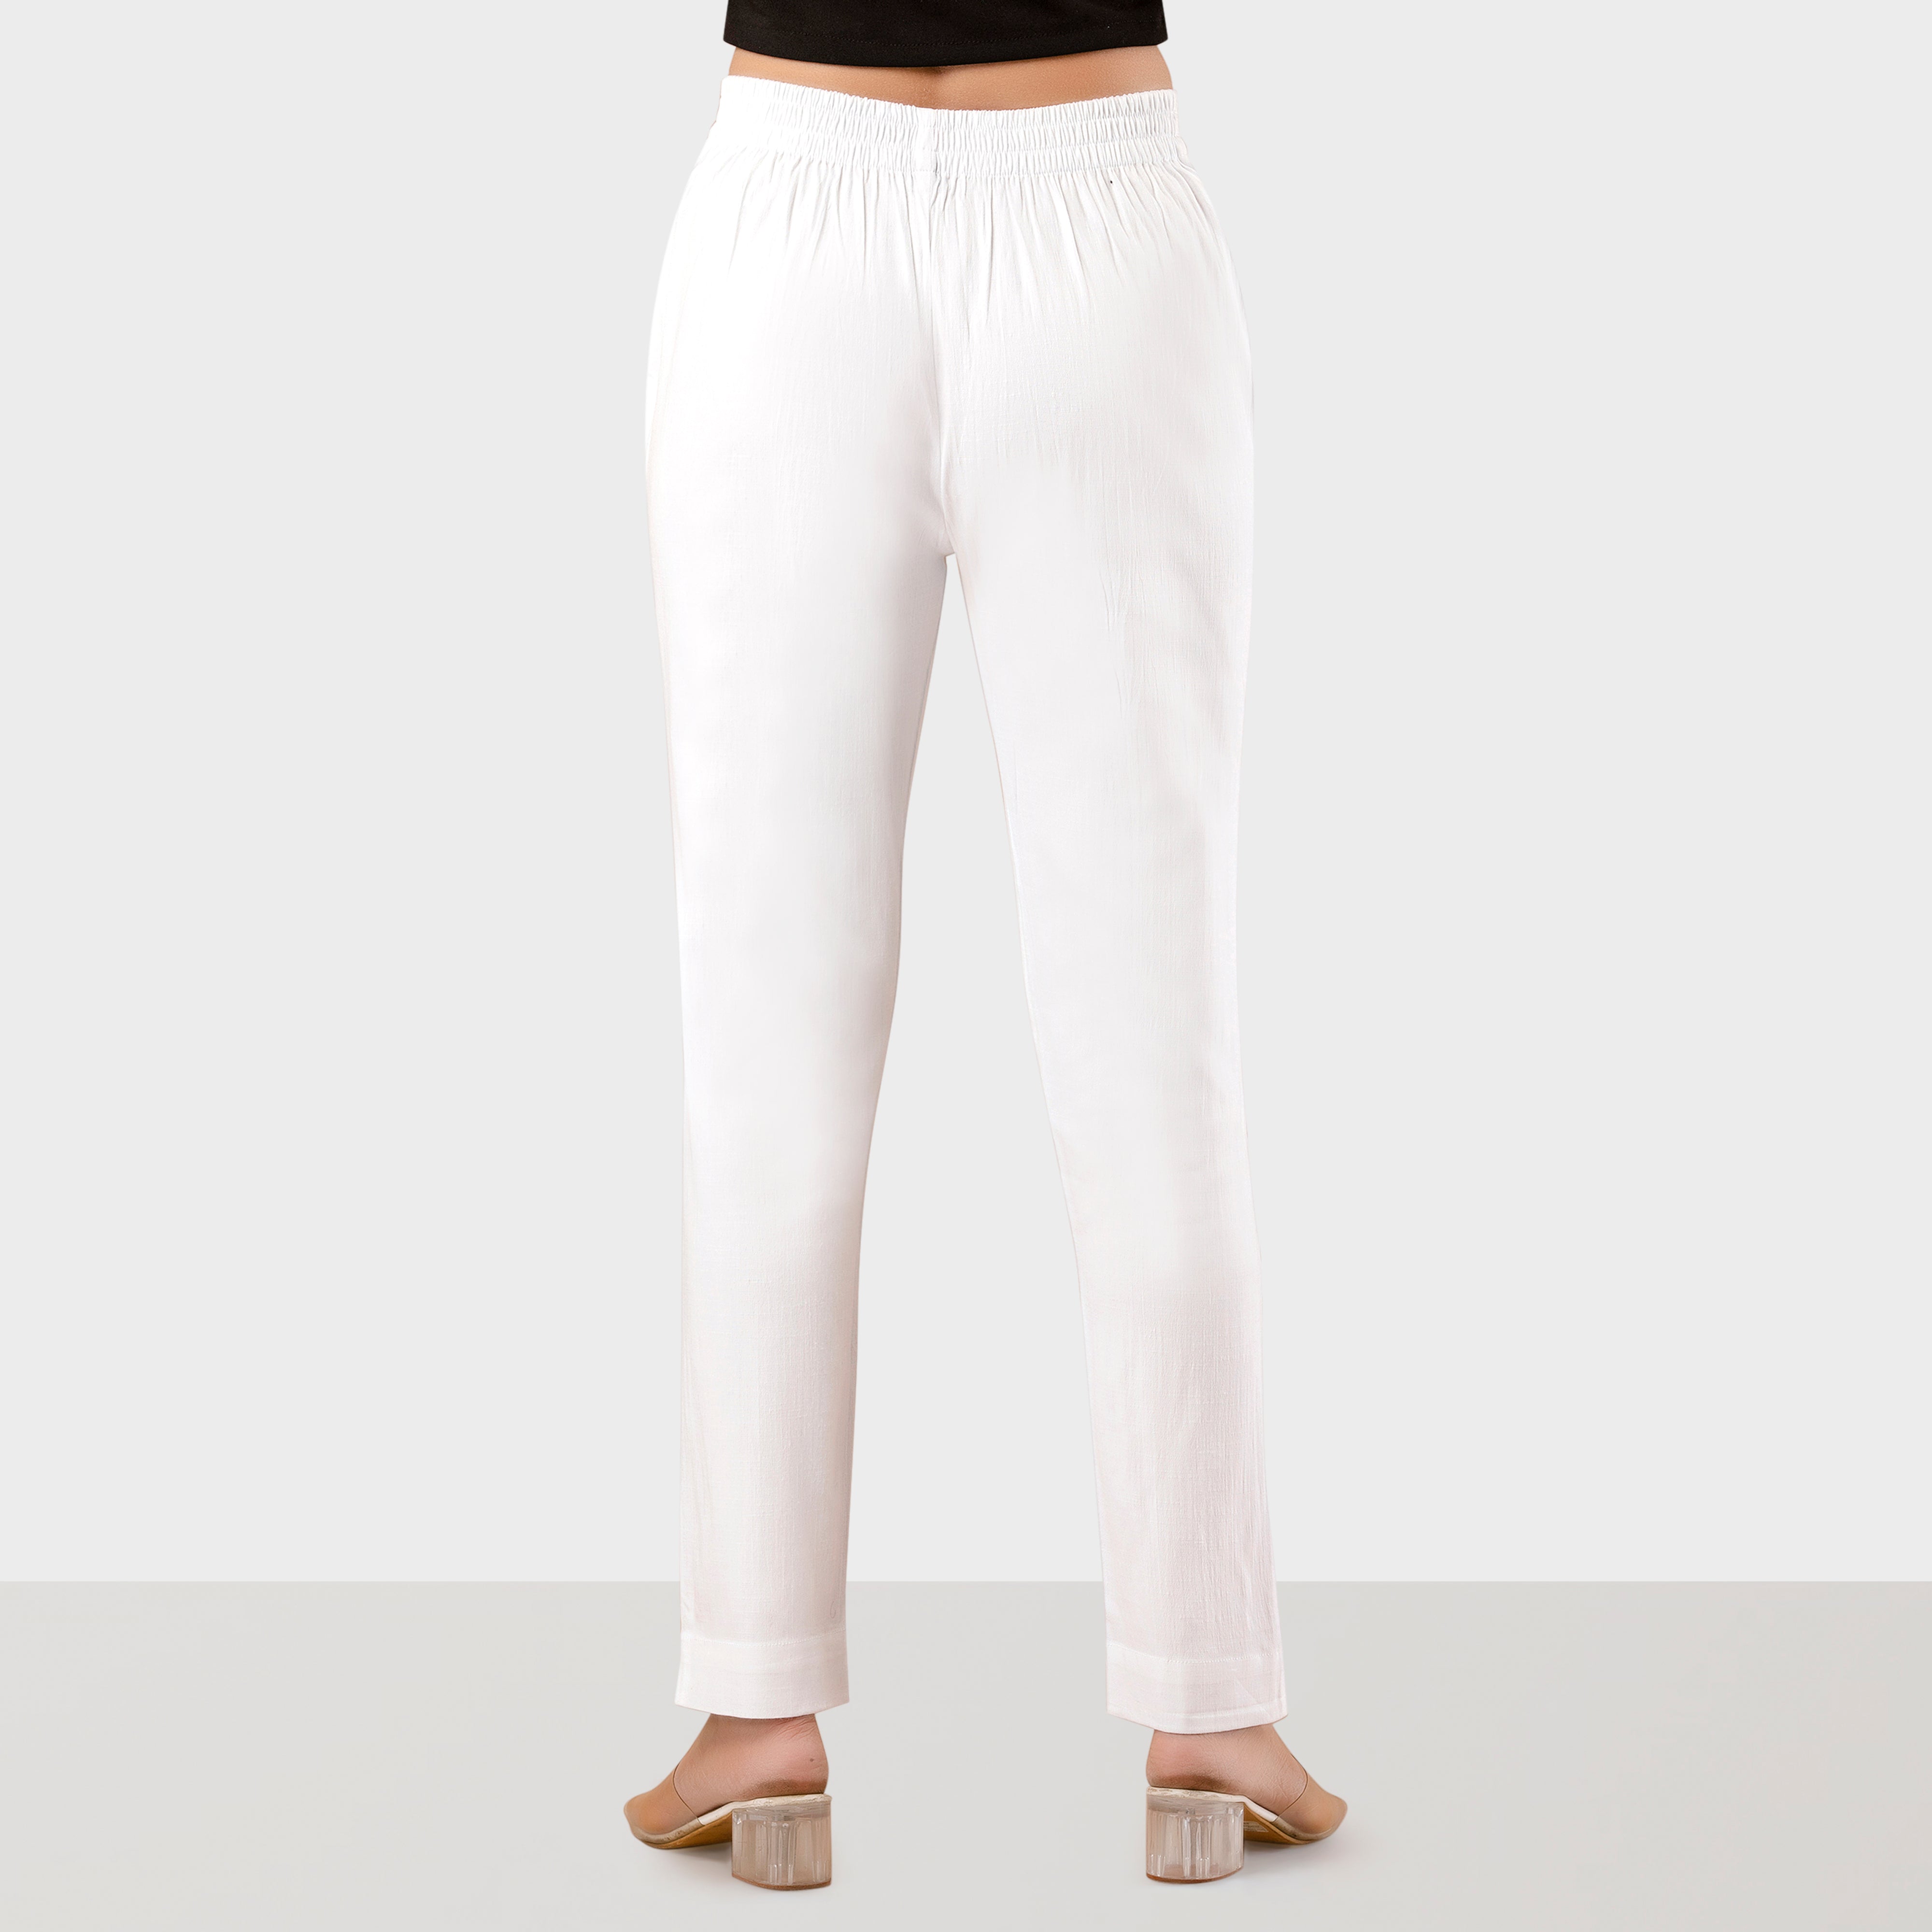 Regular Fit Women White Stretchable Pants